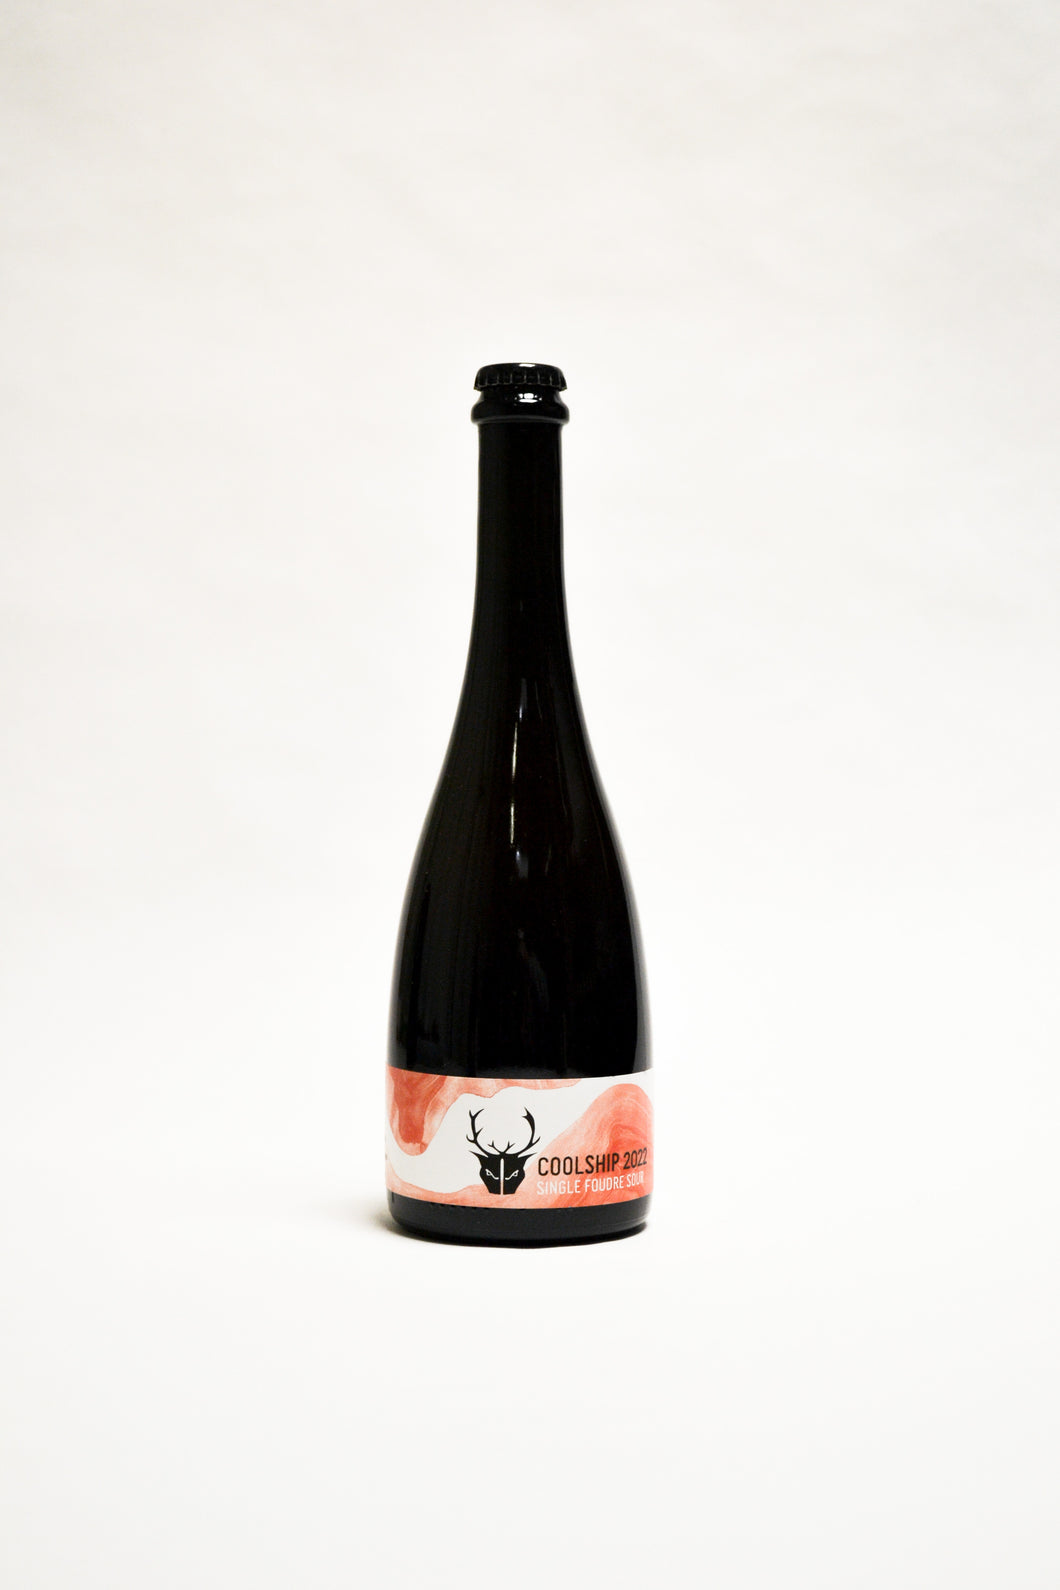 The Wild Beer Co. - Coolship 2022